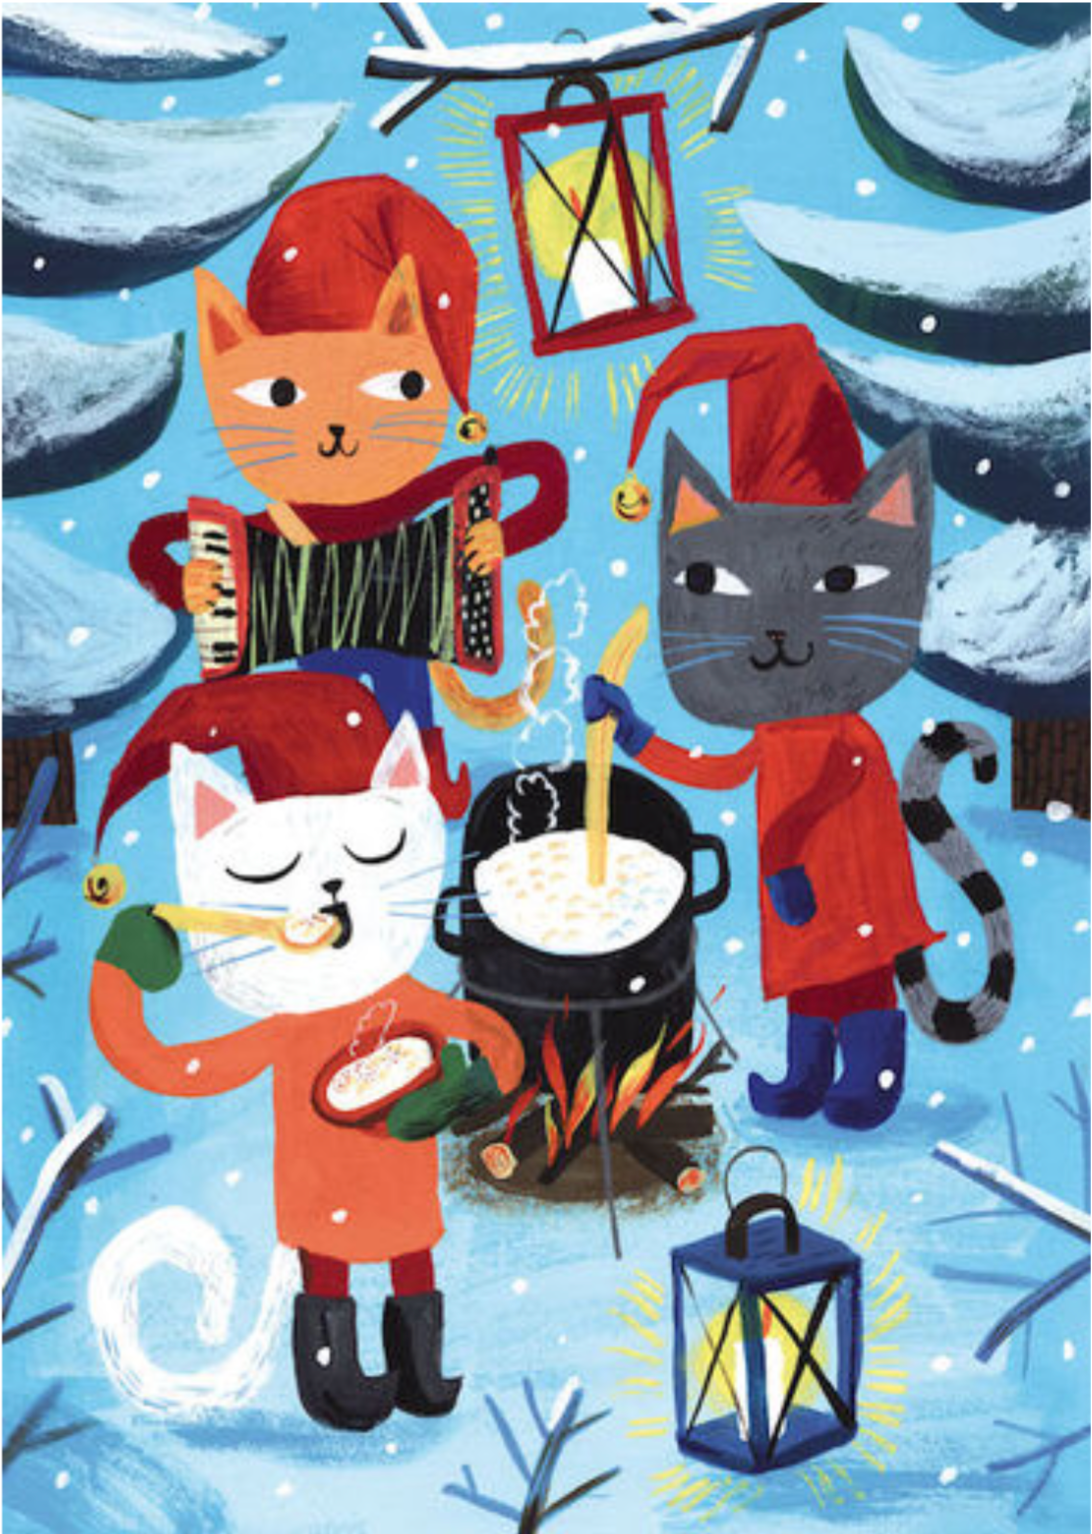 Three illustrated cats surrounding a cauldron of porridge outside in the winter with lanterns and an accordion.